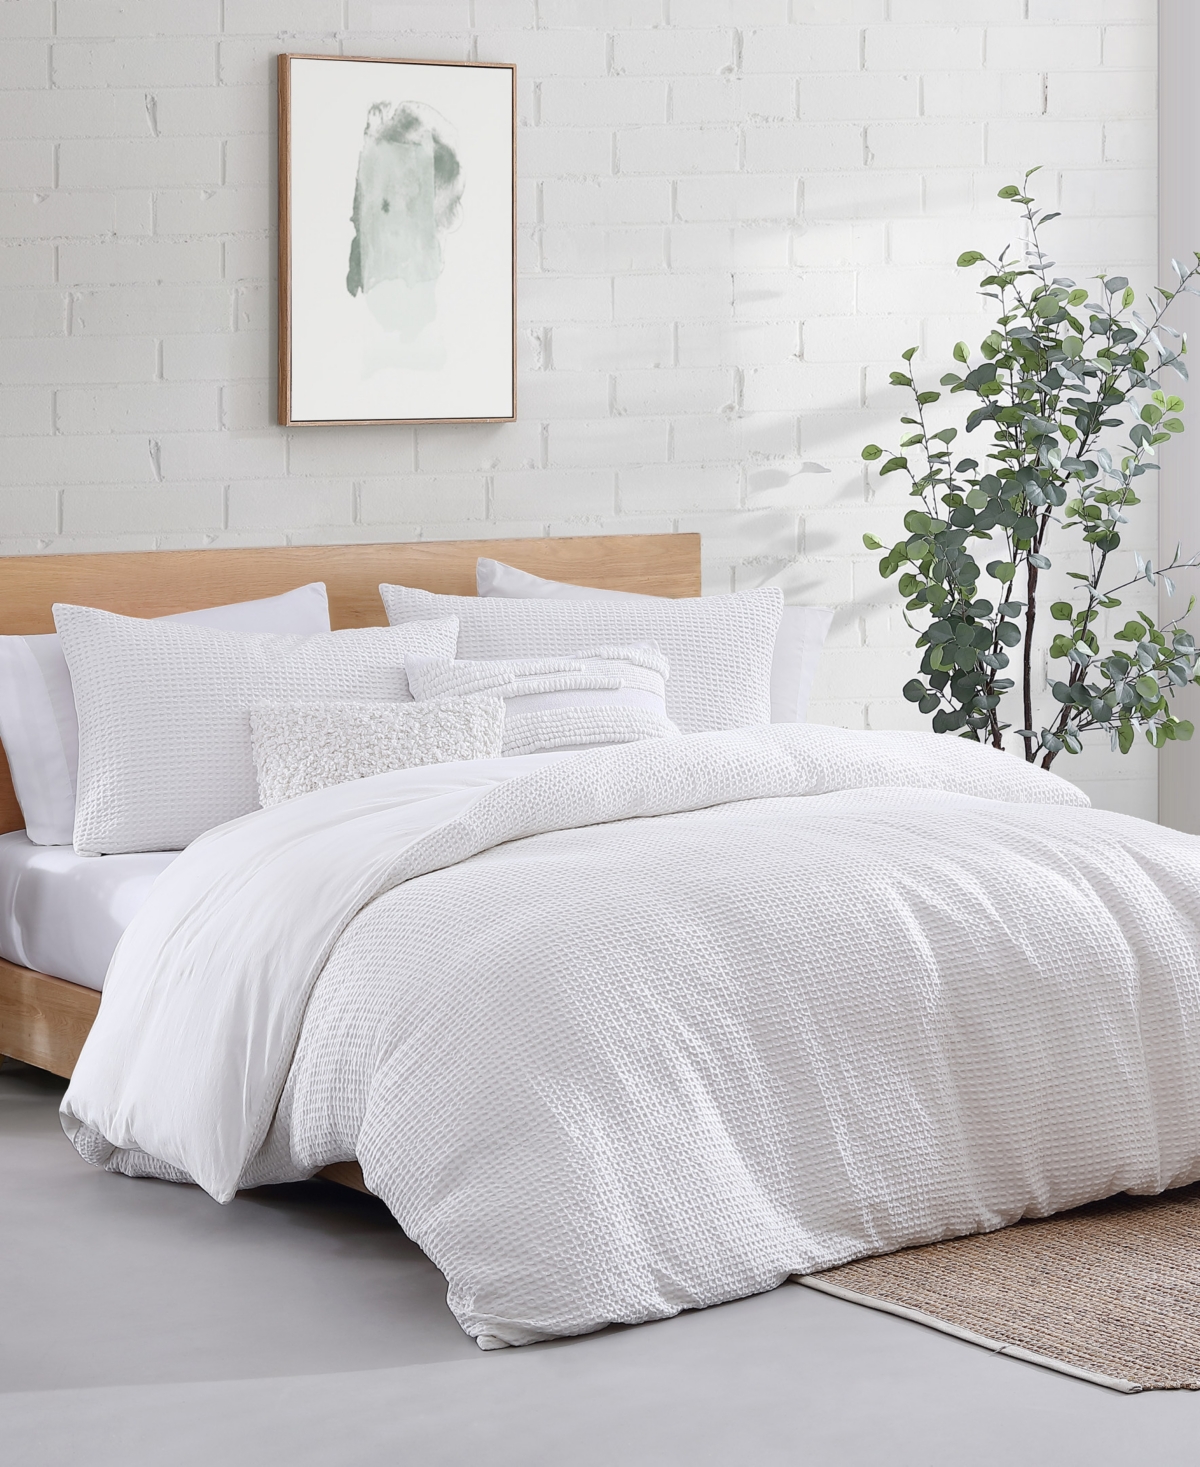 Dkny Modern Waffle 3 Piece Comforter Set, Queen In White